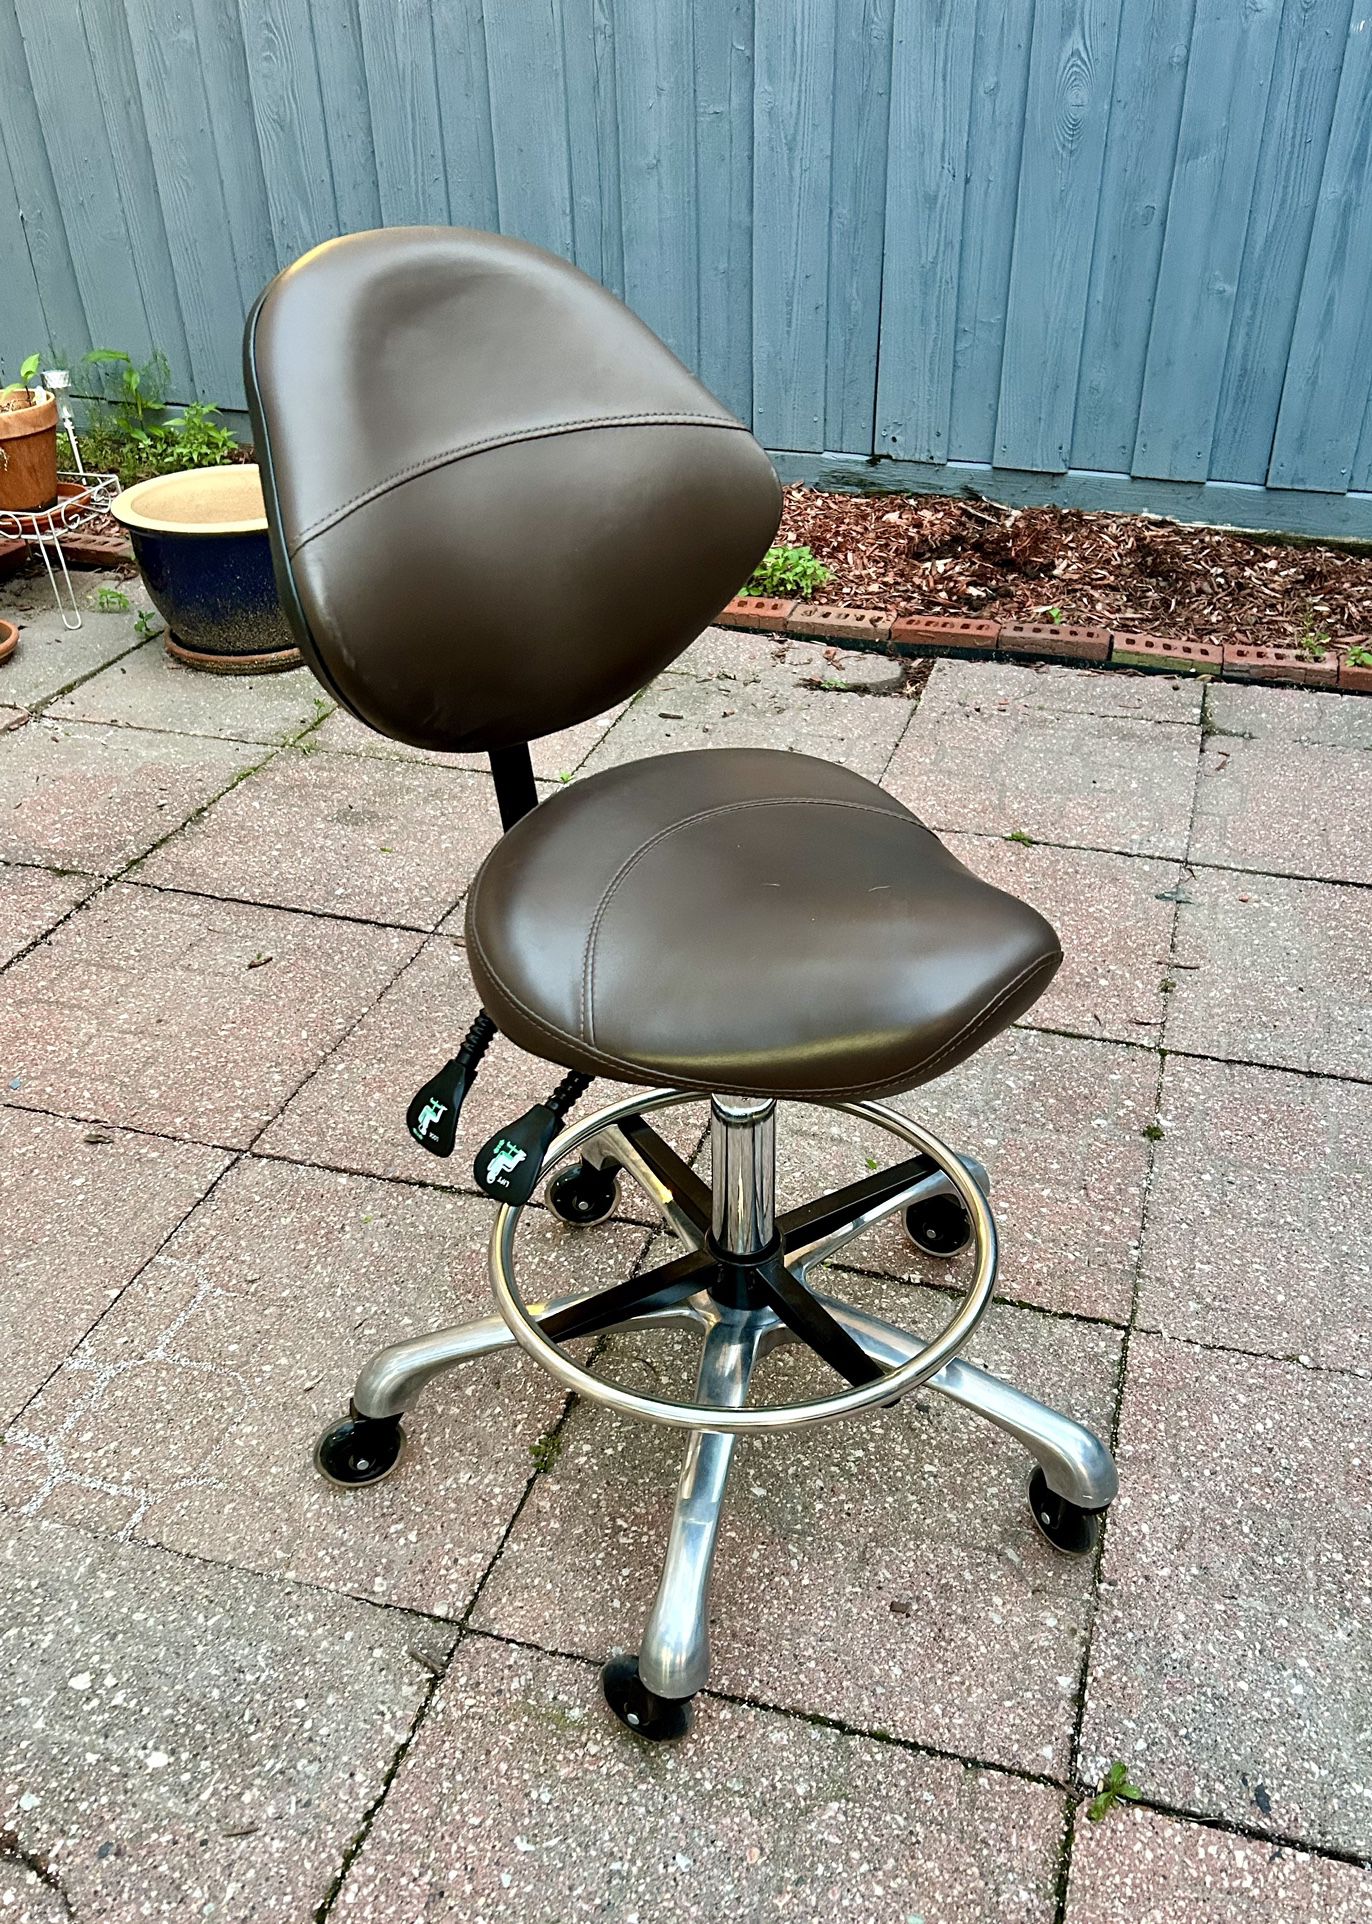 Saddle Stool Chair with Back Support and Footrest